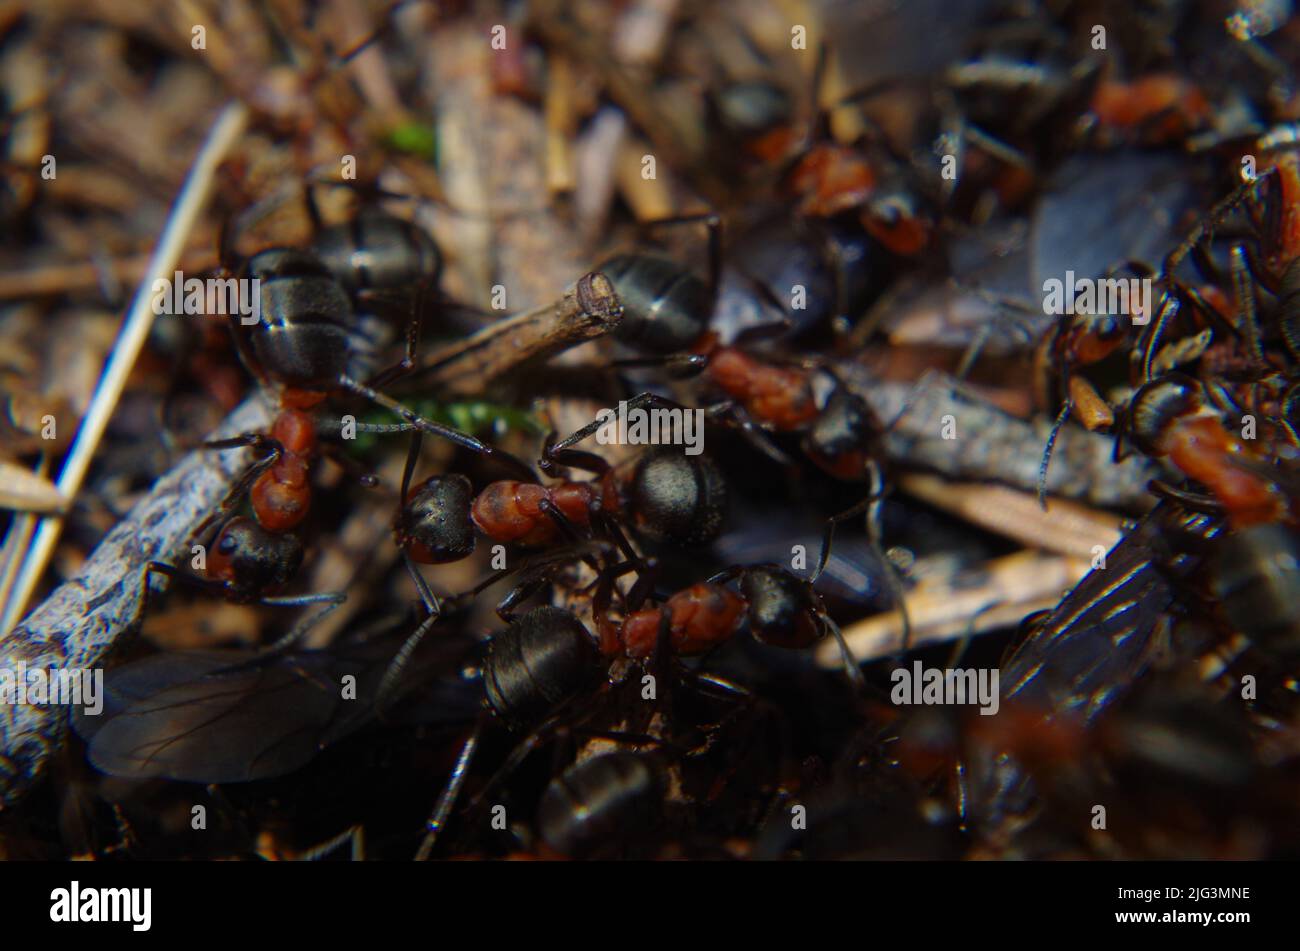 Ants in Detaill. Stock Photo